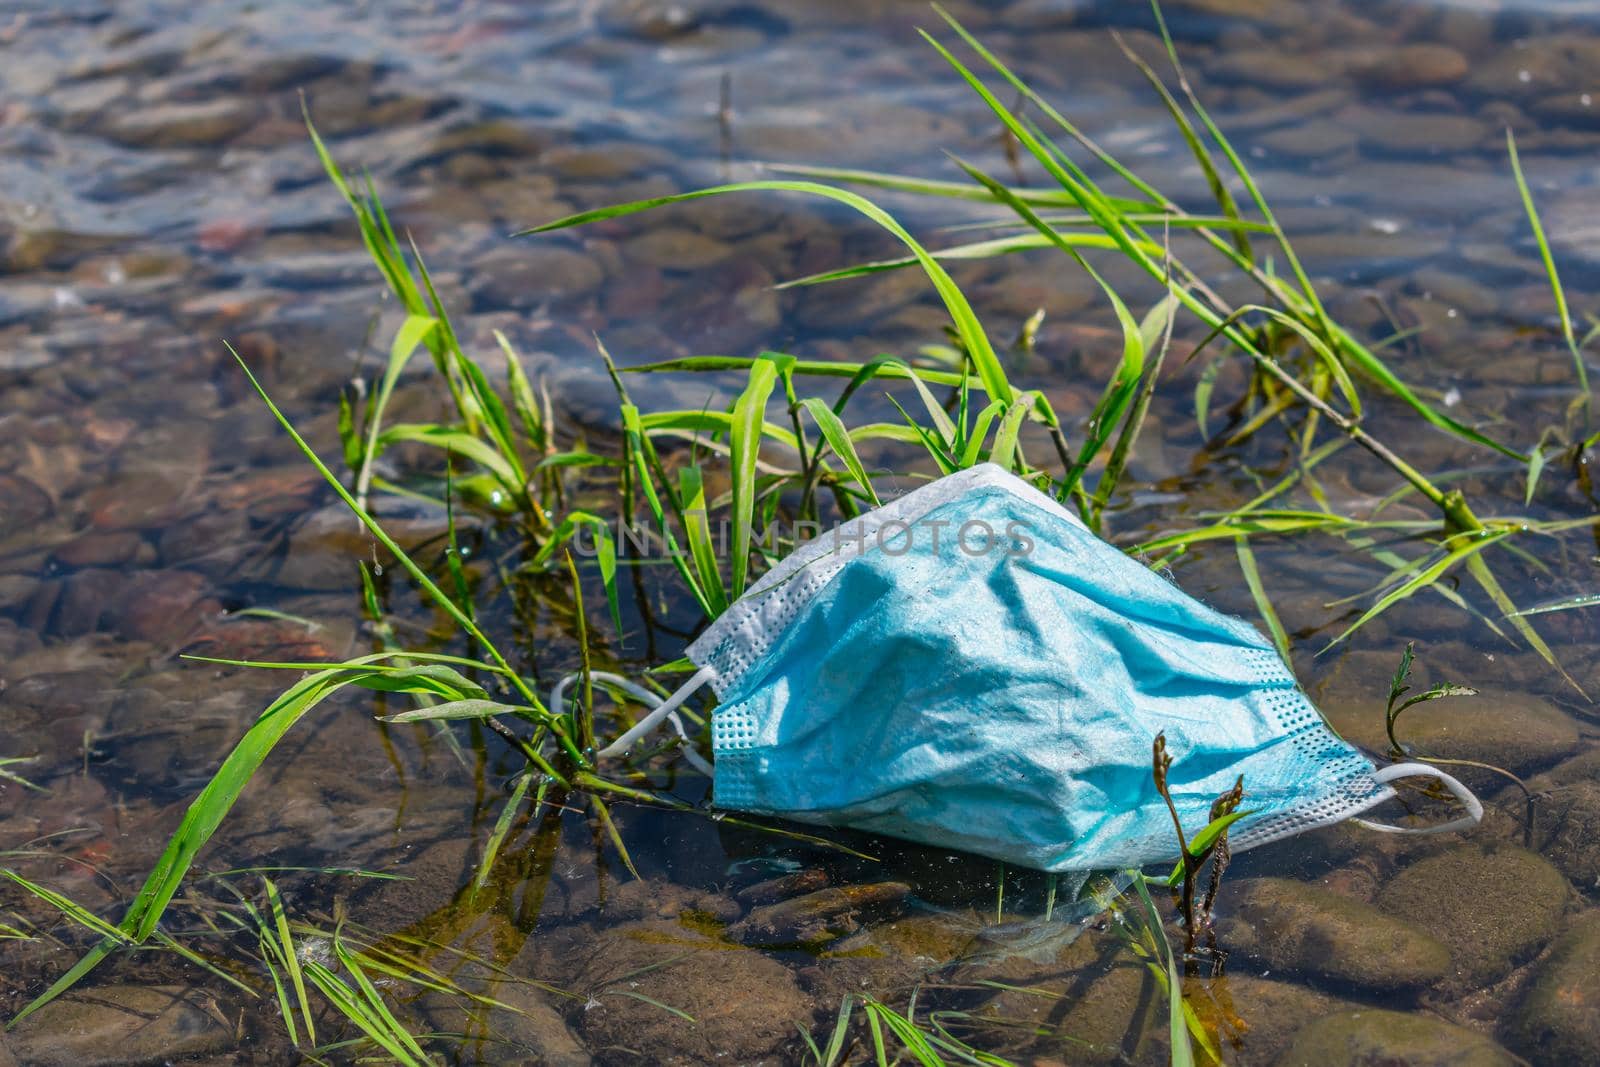 Consequences of the coronavirus pandemic, abandoned medical masks are everywhere. Medical mask thrown into the river and stuck in the grass on the shore